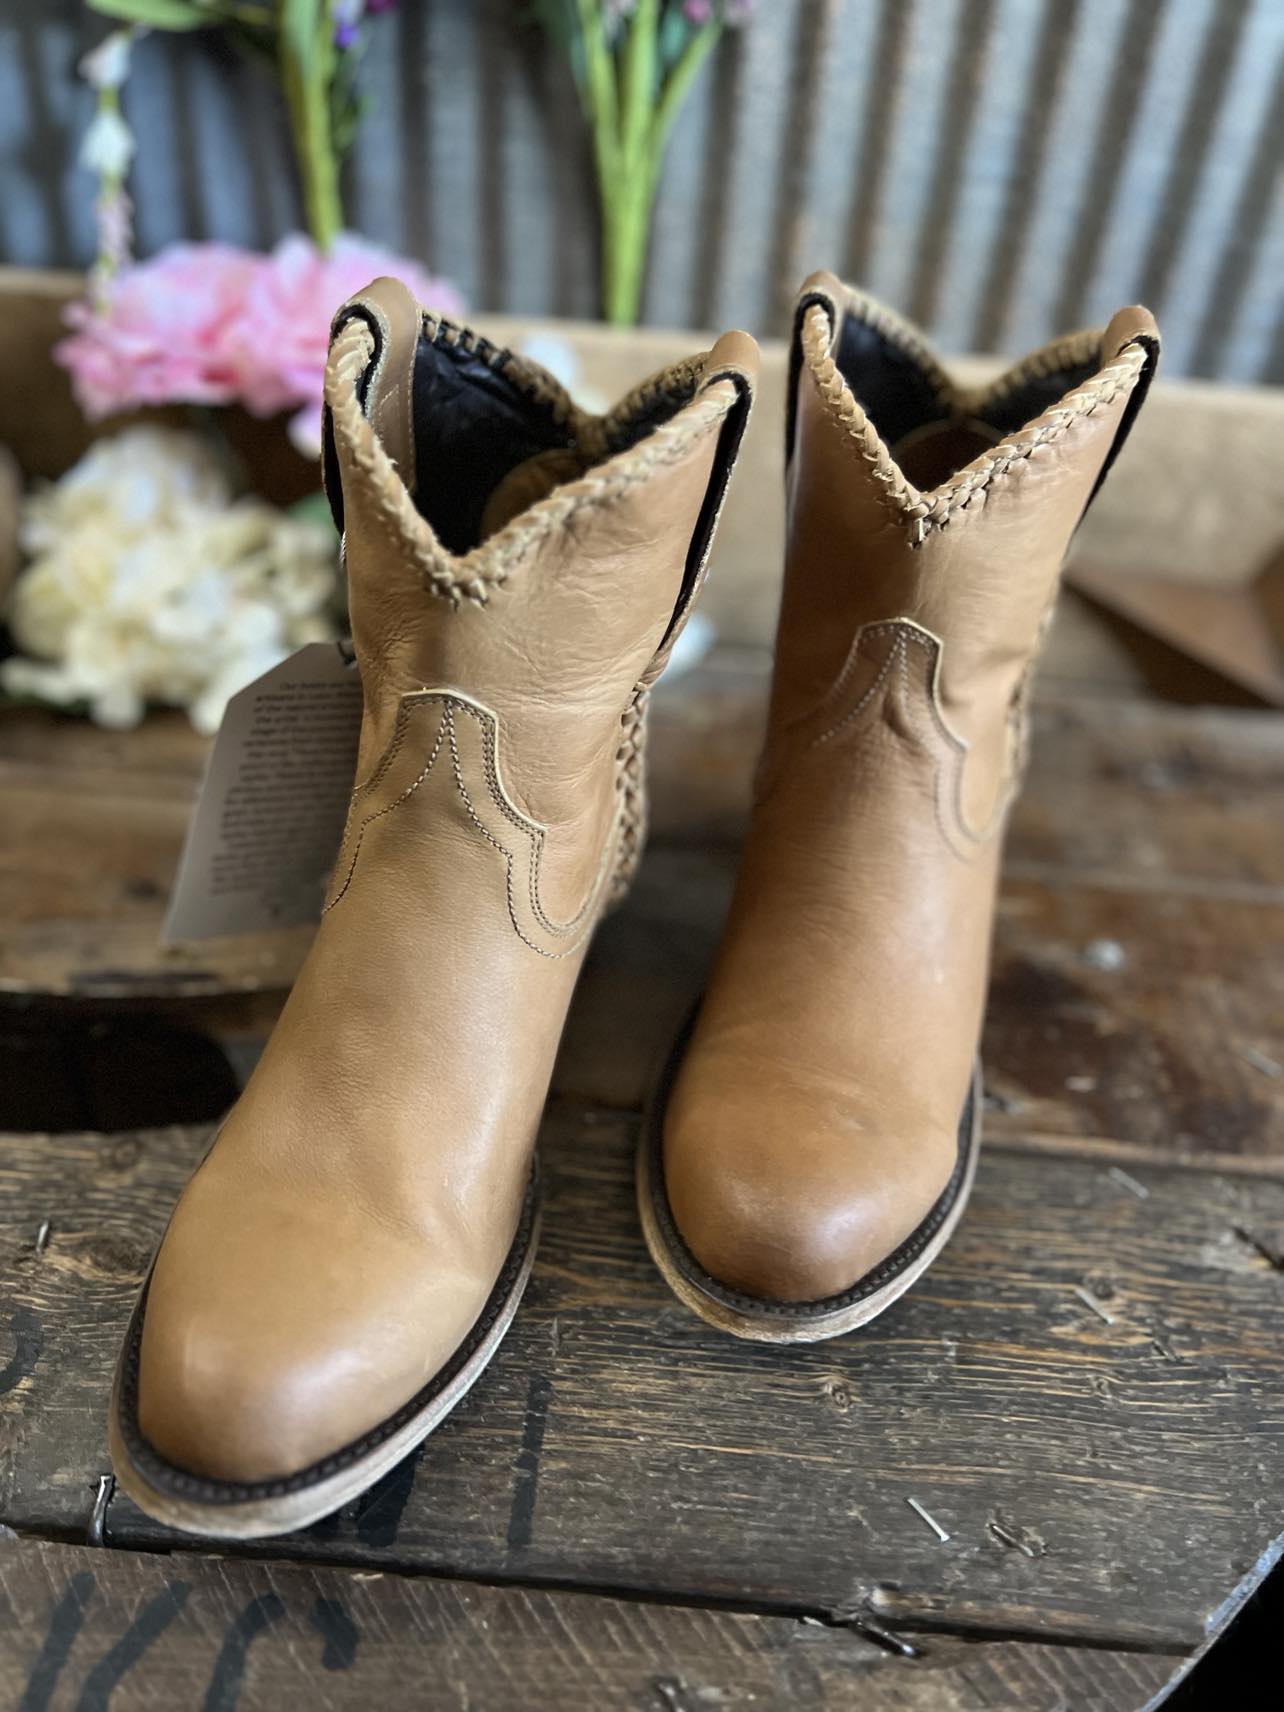 Lane Boots Plain Jane Saddle Bootie-Women's Boots-Lane Boots-Lucky J Boots & More, Women's, Men's, & Kids Western Store Located in Carthage, MO